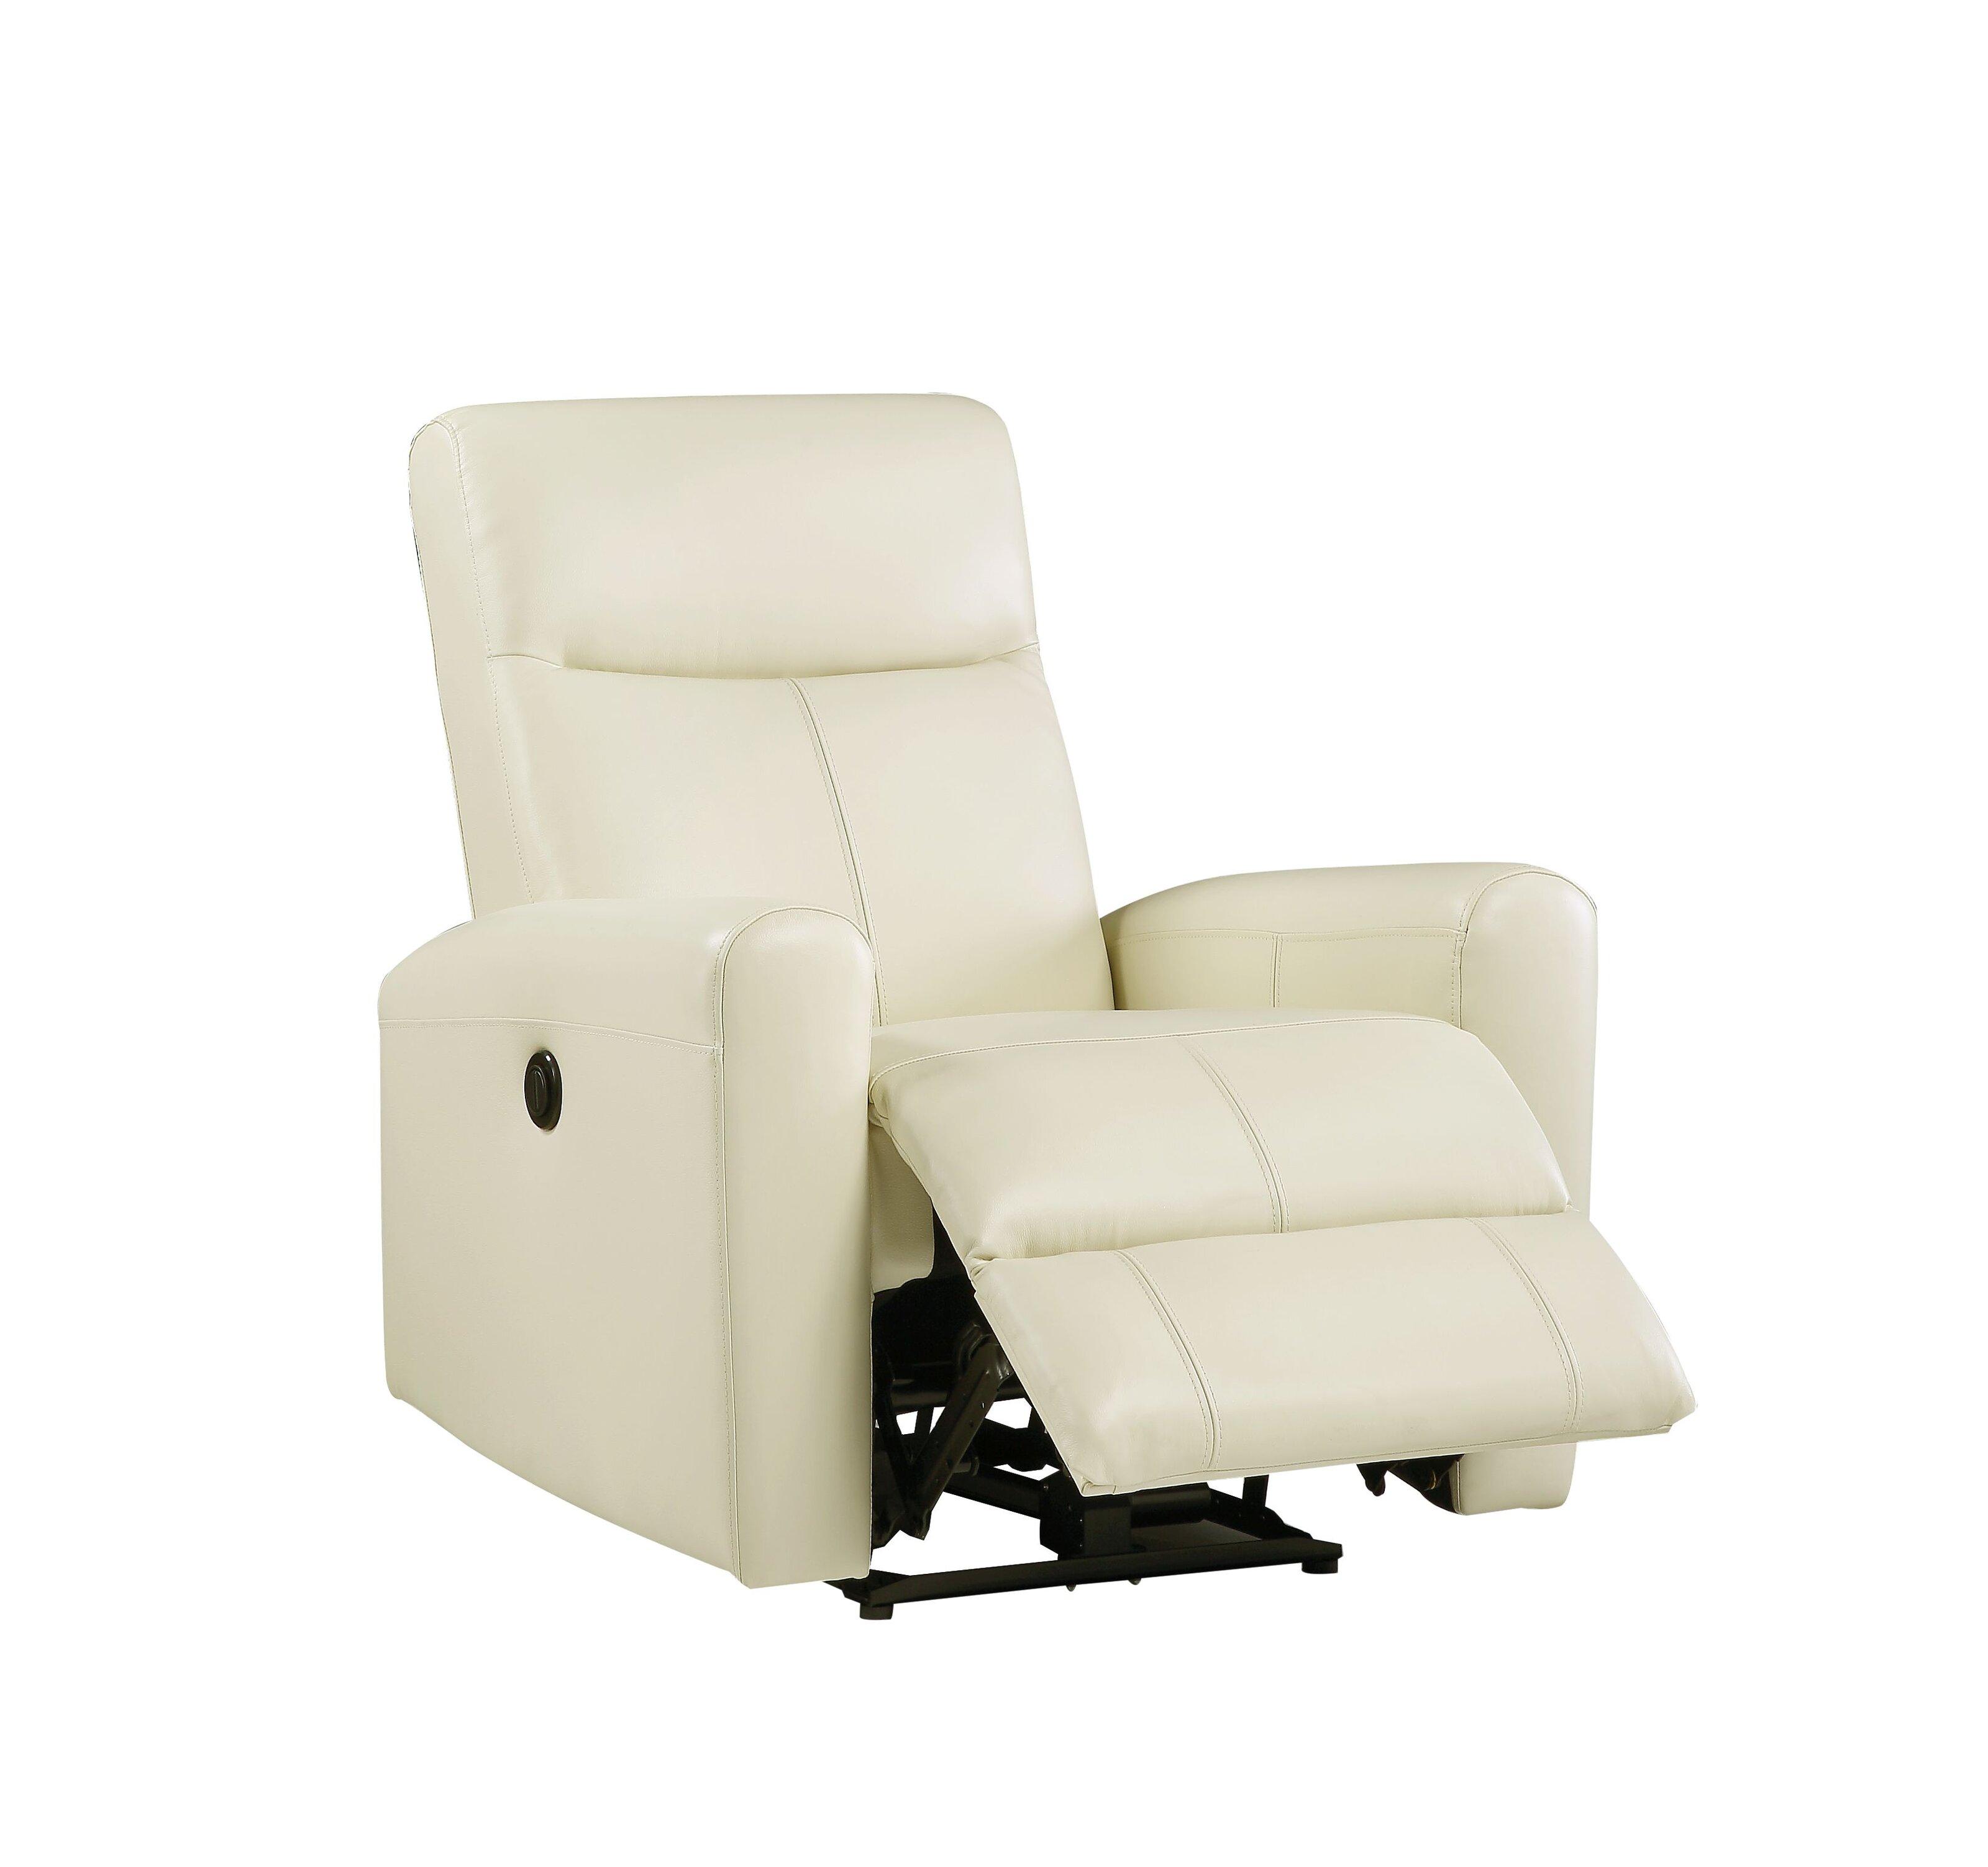 

    
Contemporary Beige Top Grain Leather Match Recliner by Acme Blane 59772
